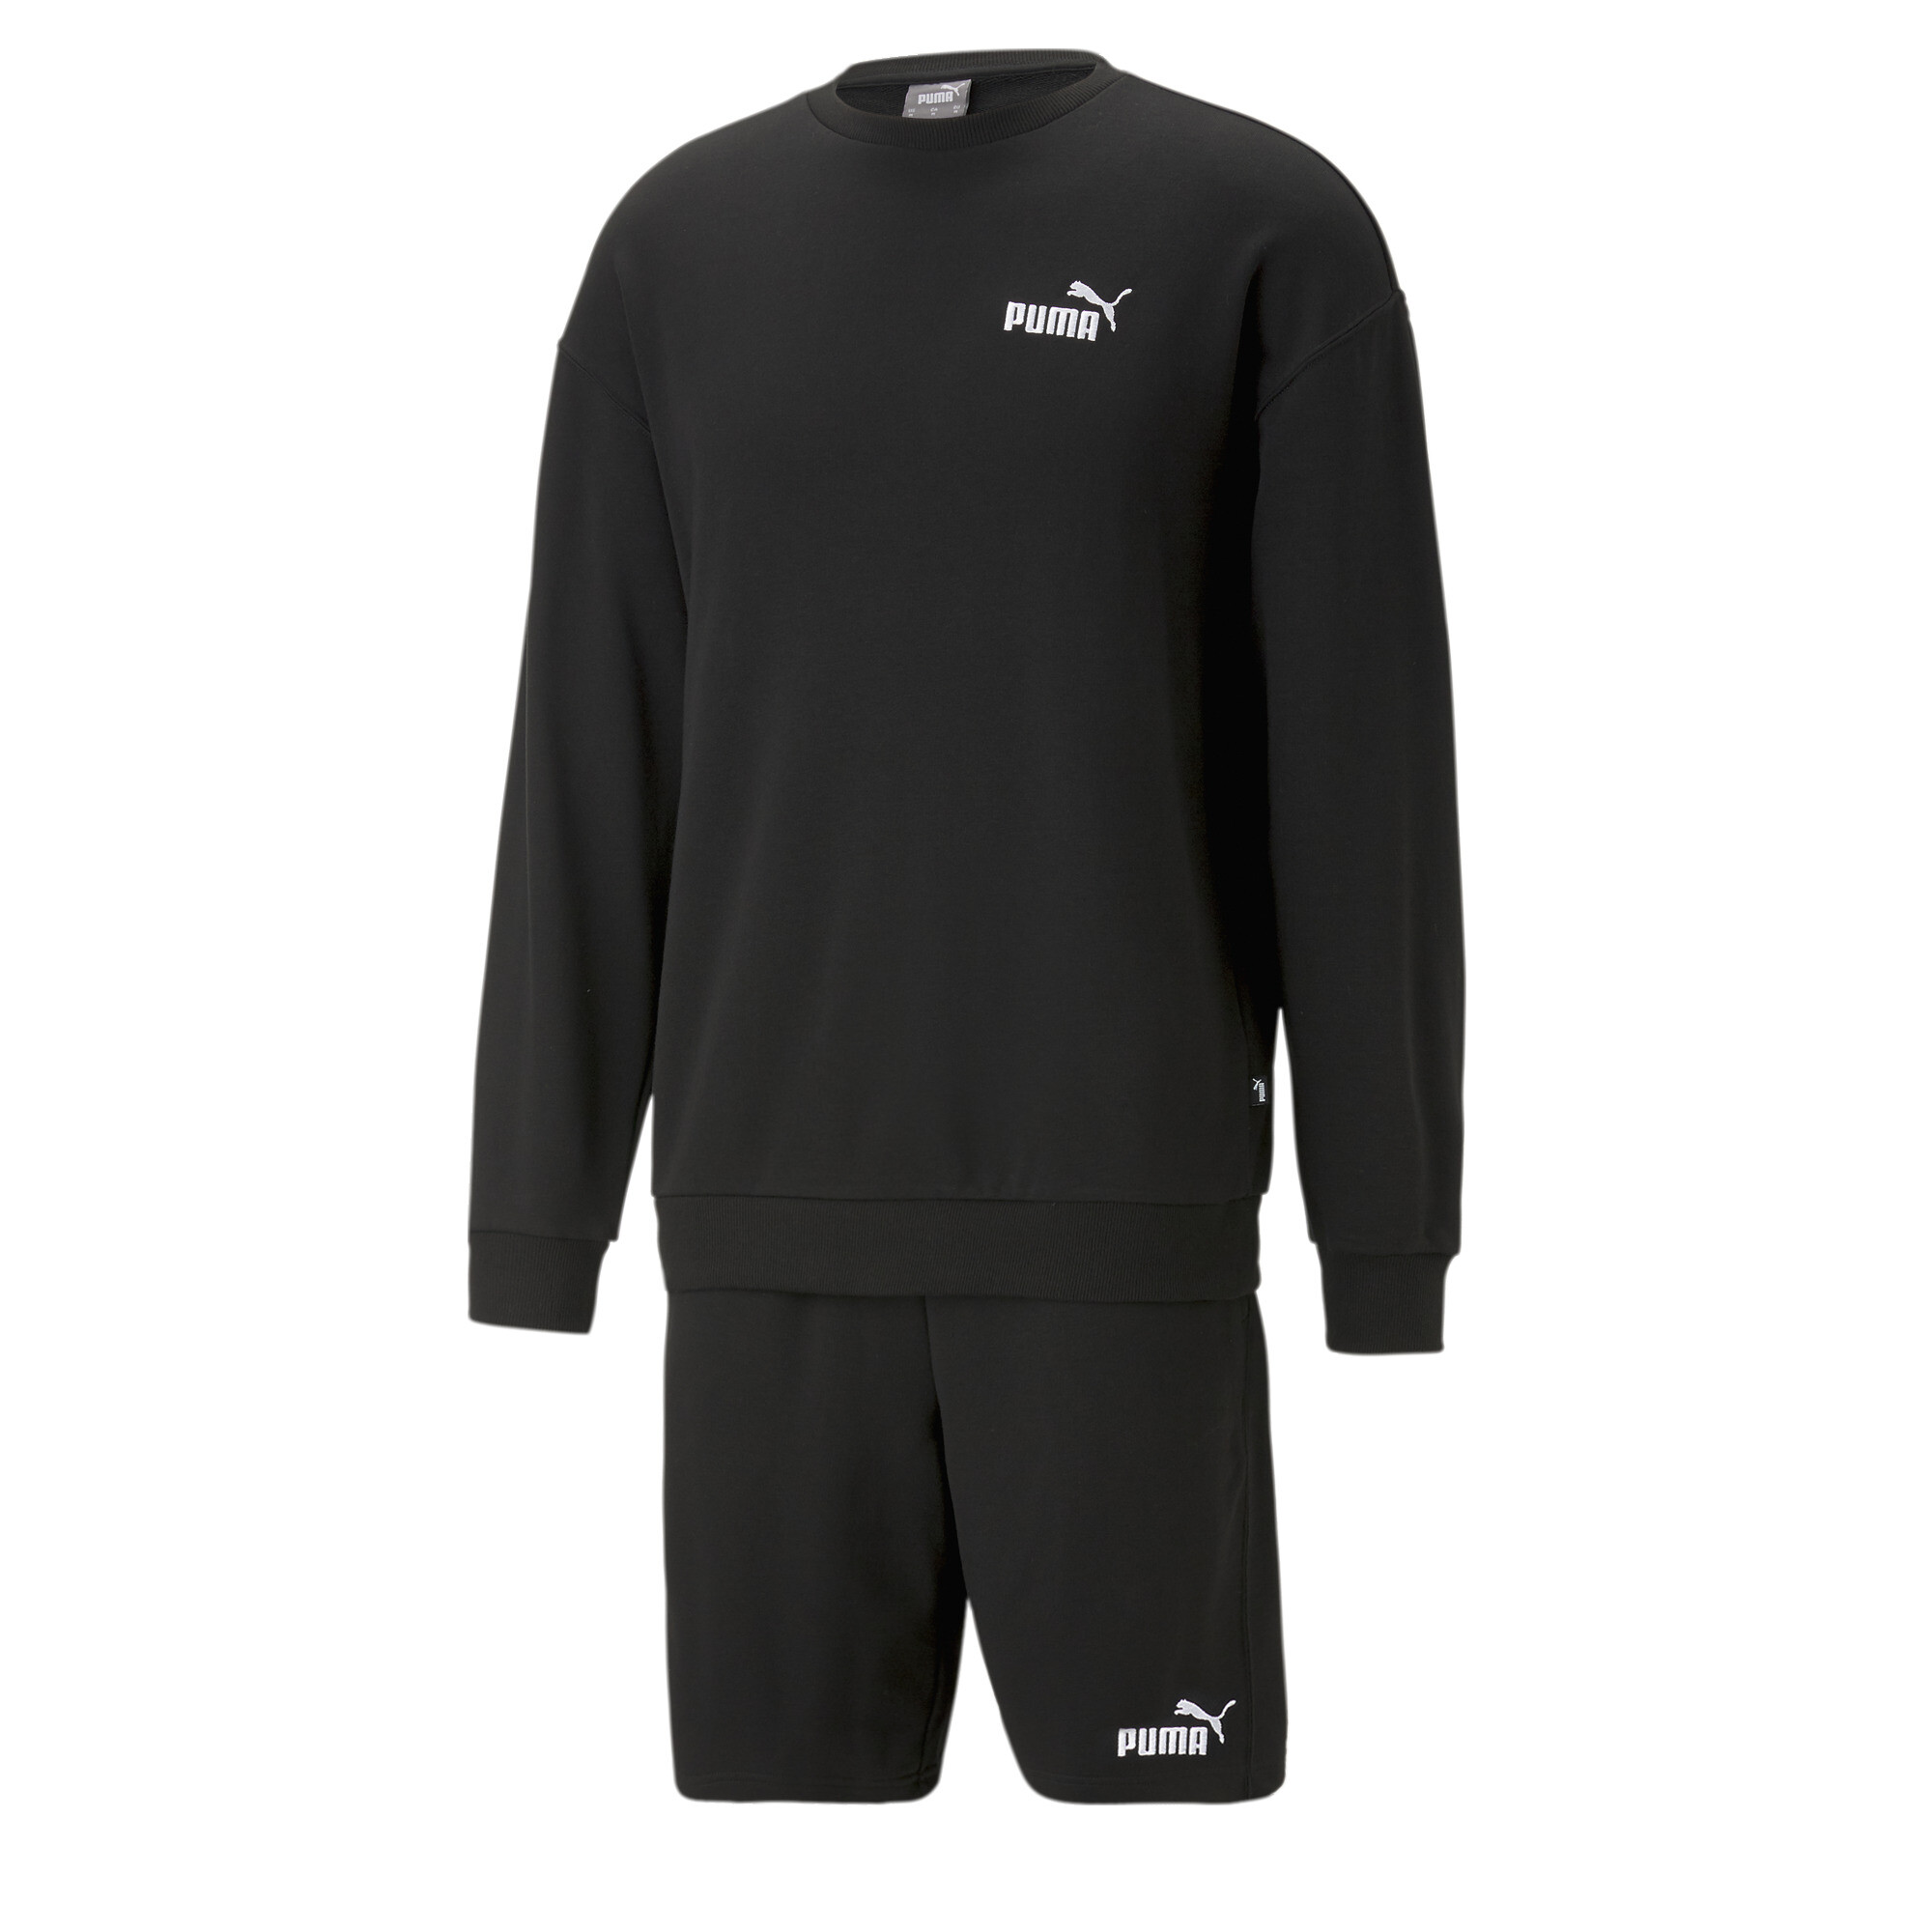 Men's Puma Relaxed Sweatsuit, Black, Size L, Clothing